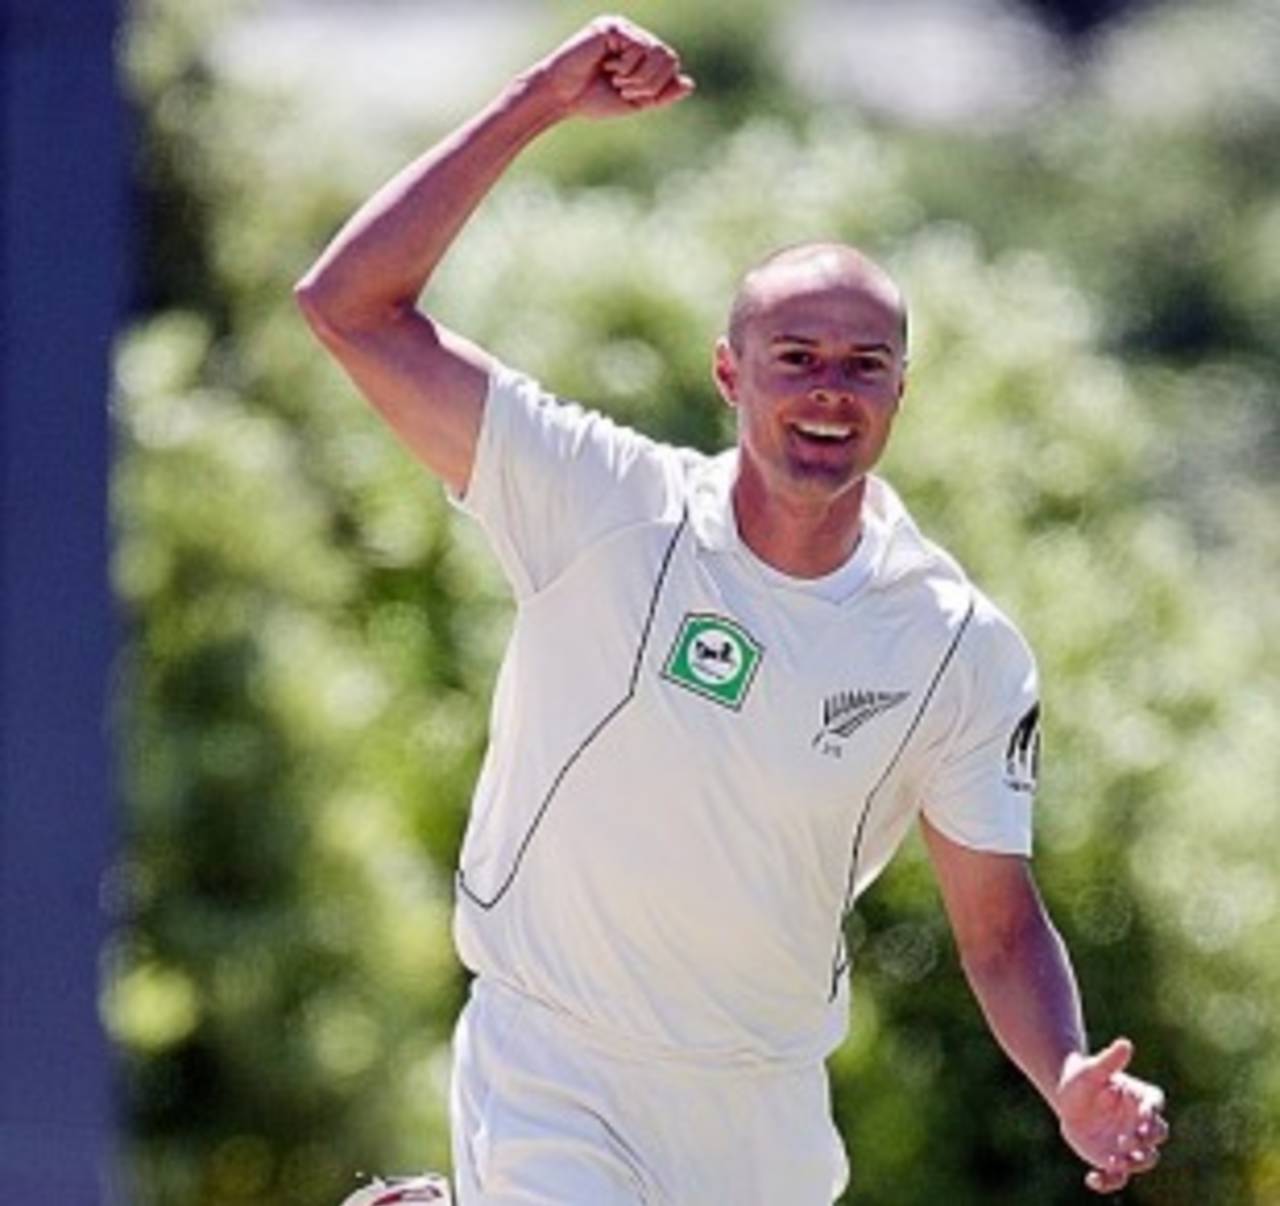 Chris Martin will lead the New Zealand attack in the absence of Shane Bond&nbsp;&nbsp;&bull;&nbsp;&nbsp;Getty Images